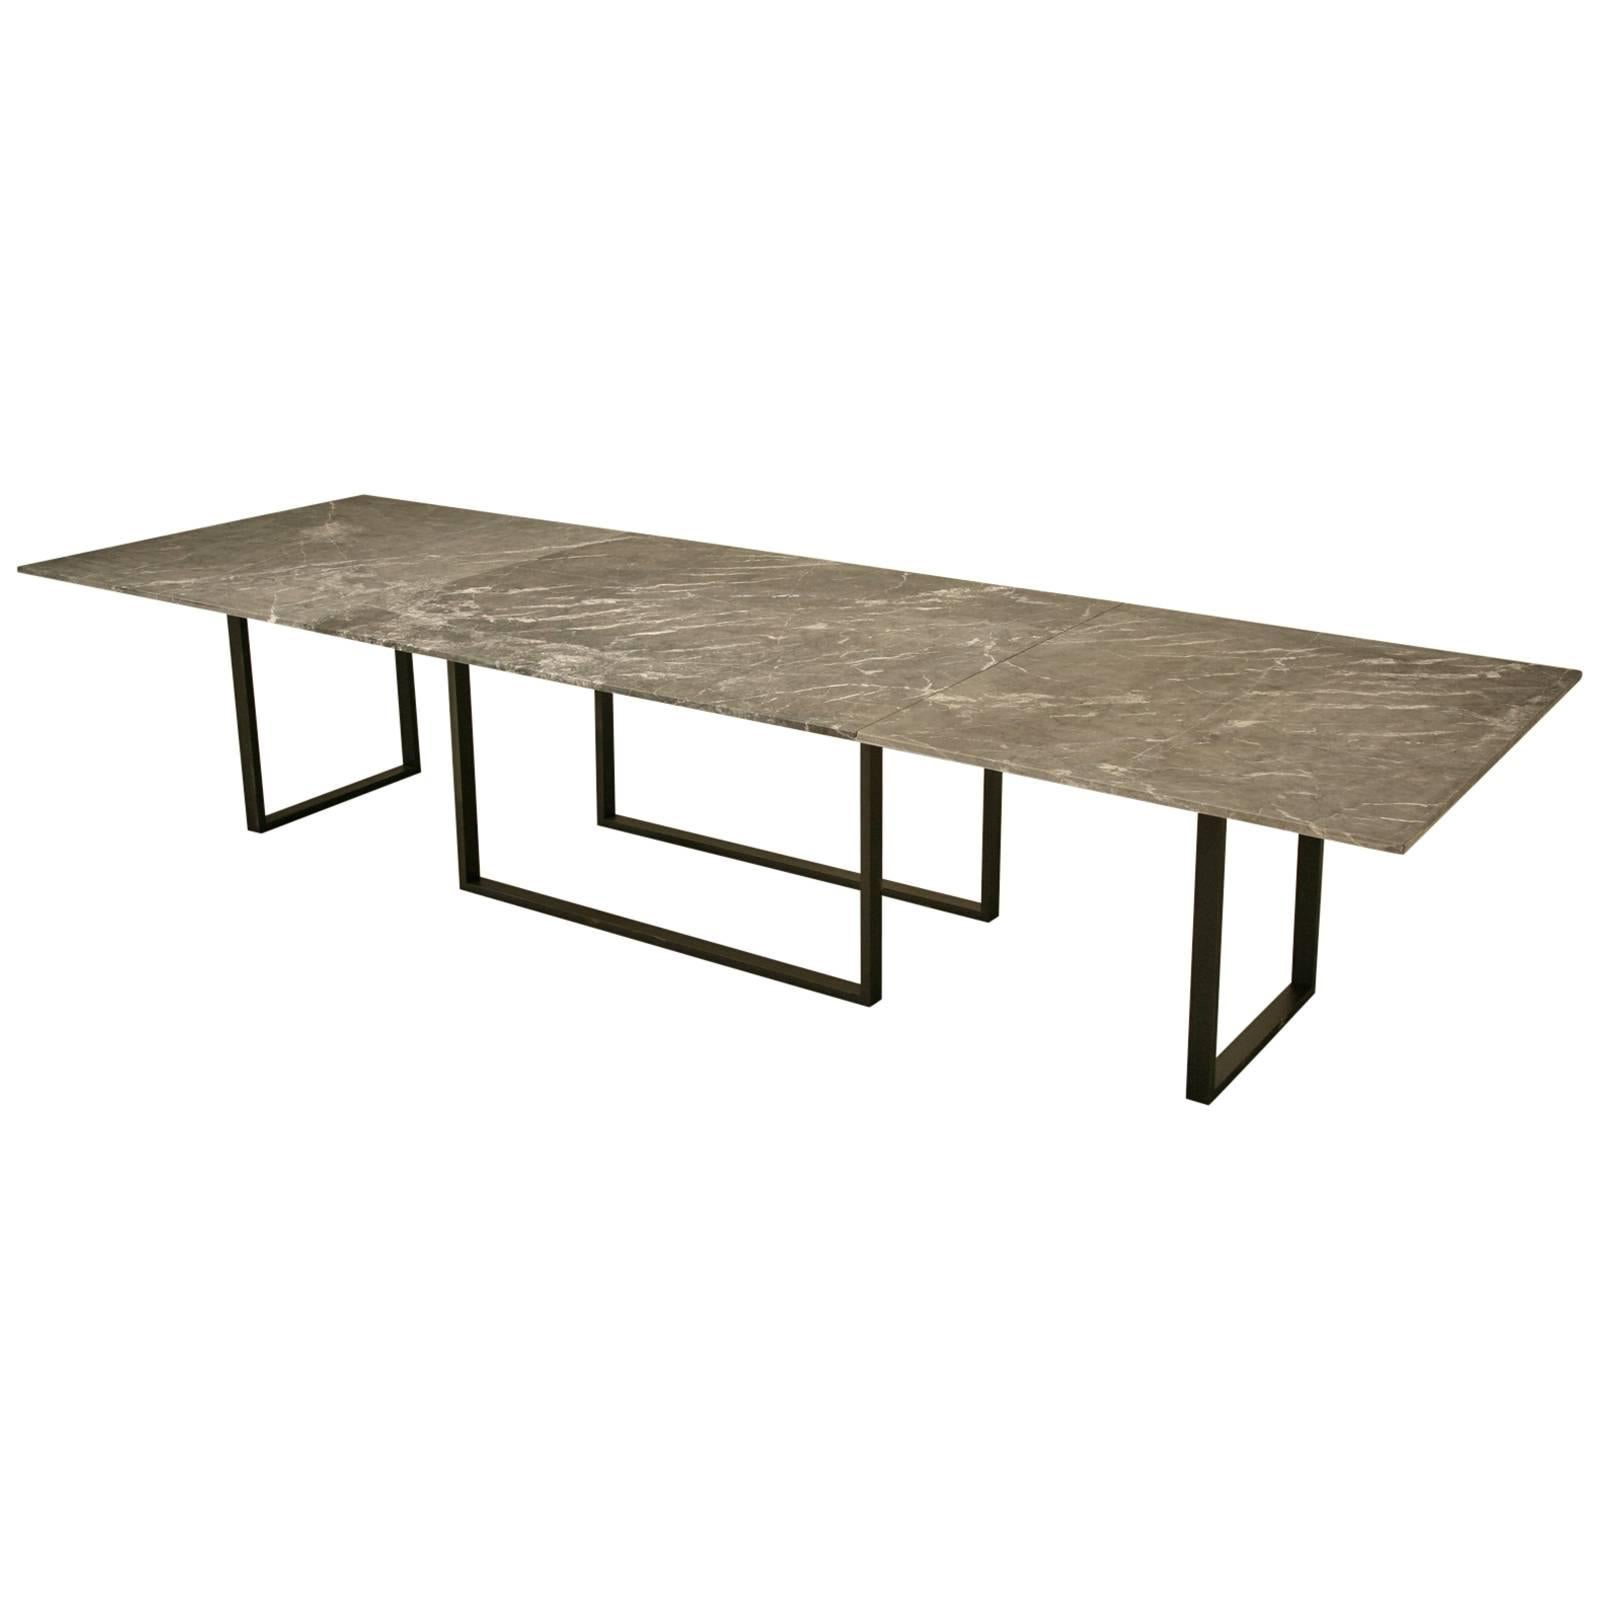 Custom Old Plank Steel Table Base Available in Any Dimension or Material